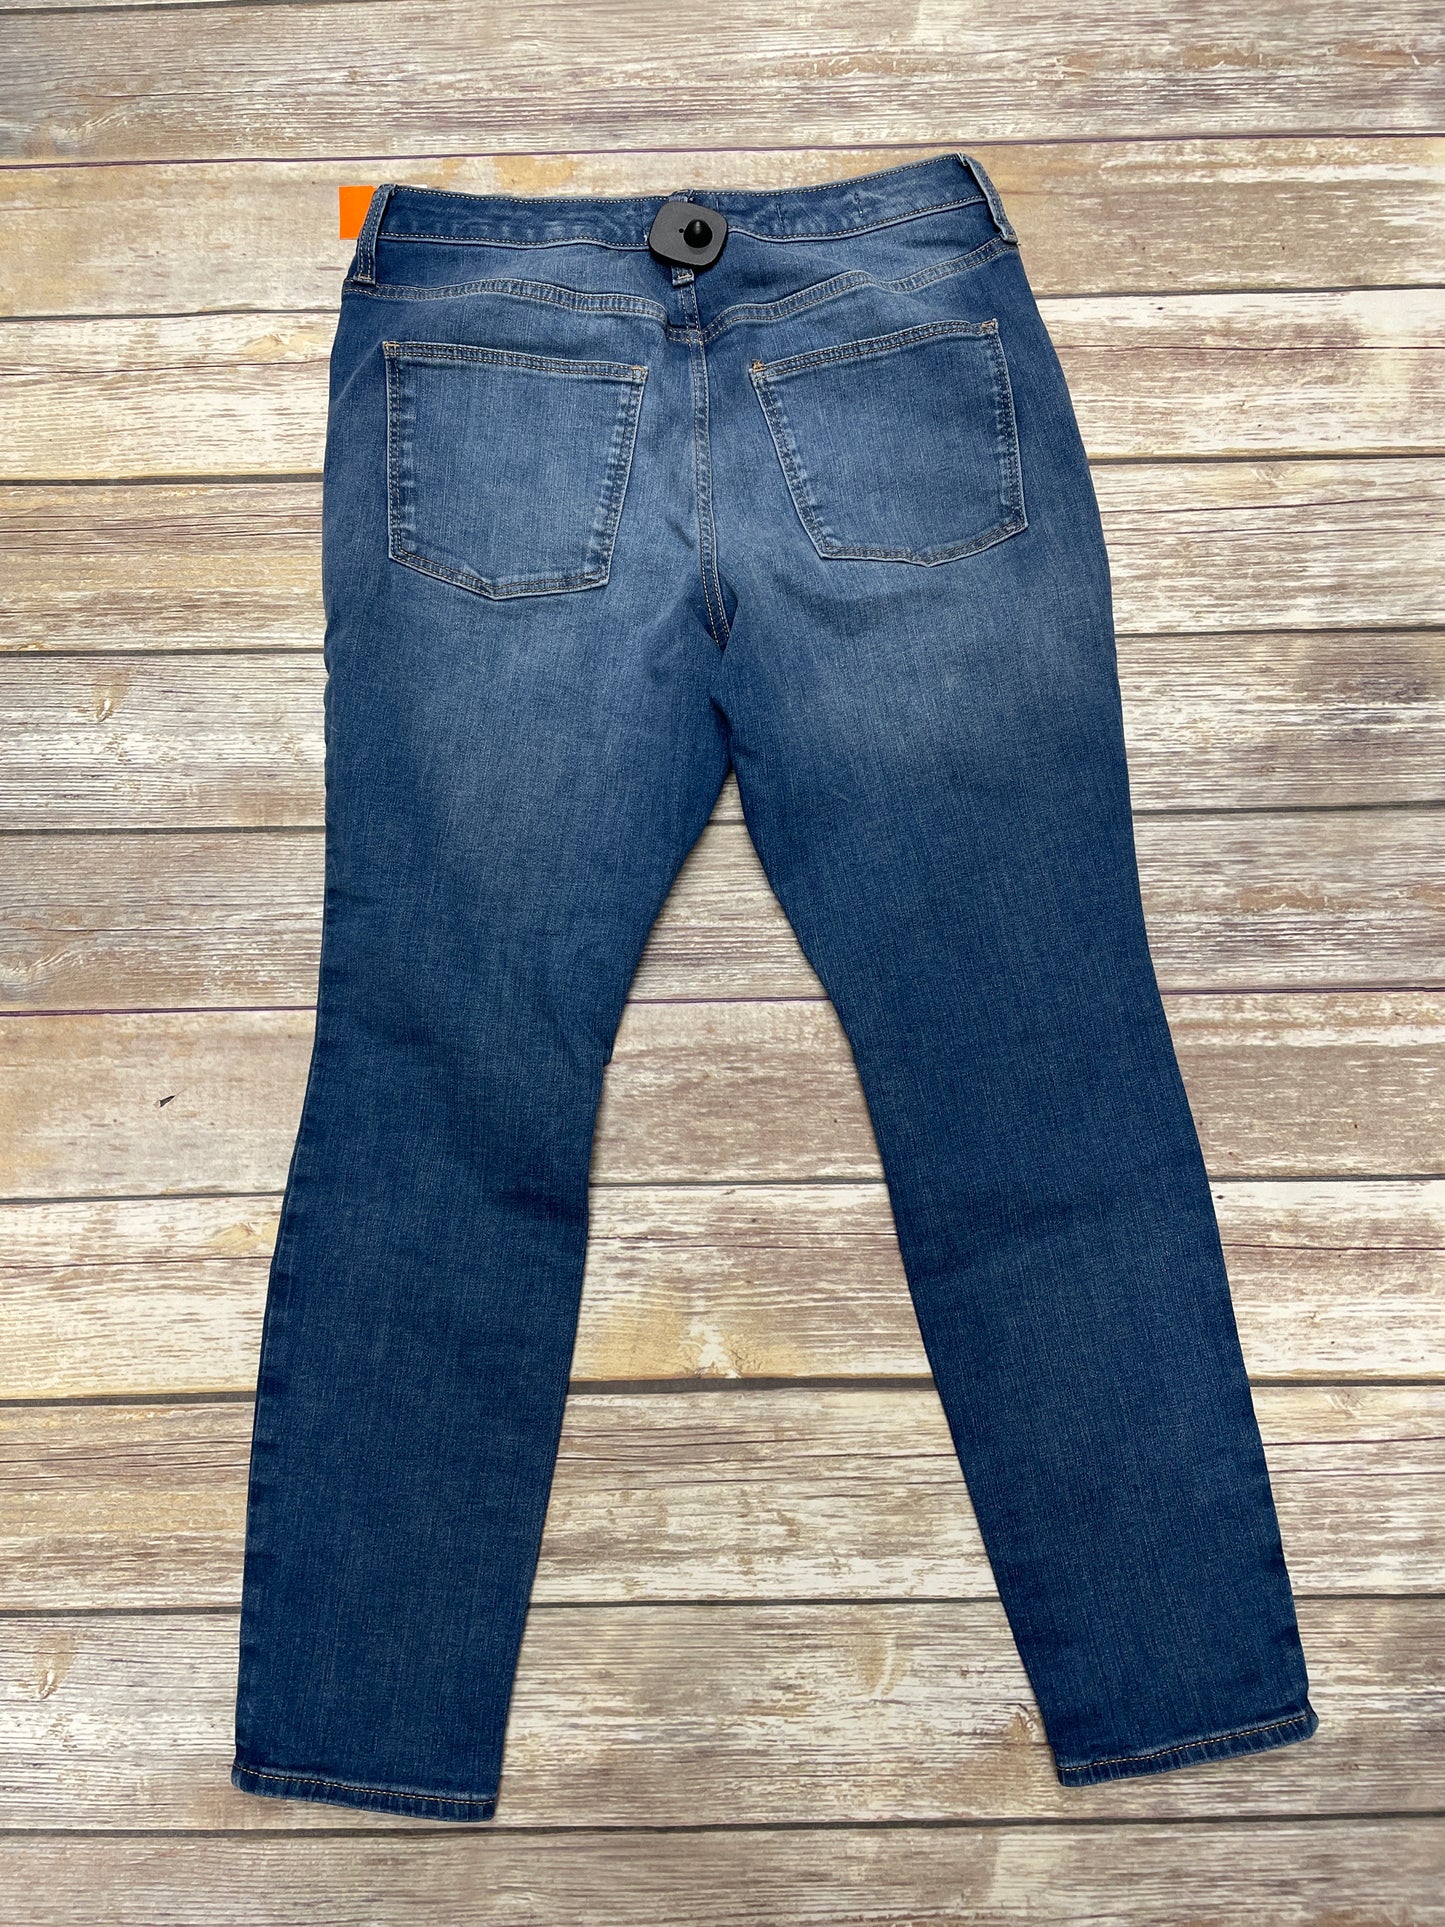 Jeans Skinny By Universal Thread  Size: 12